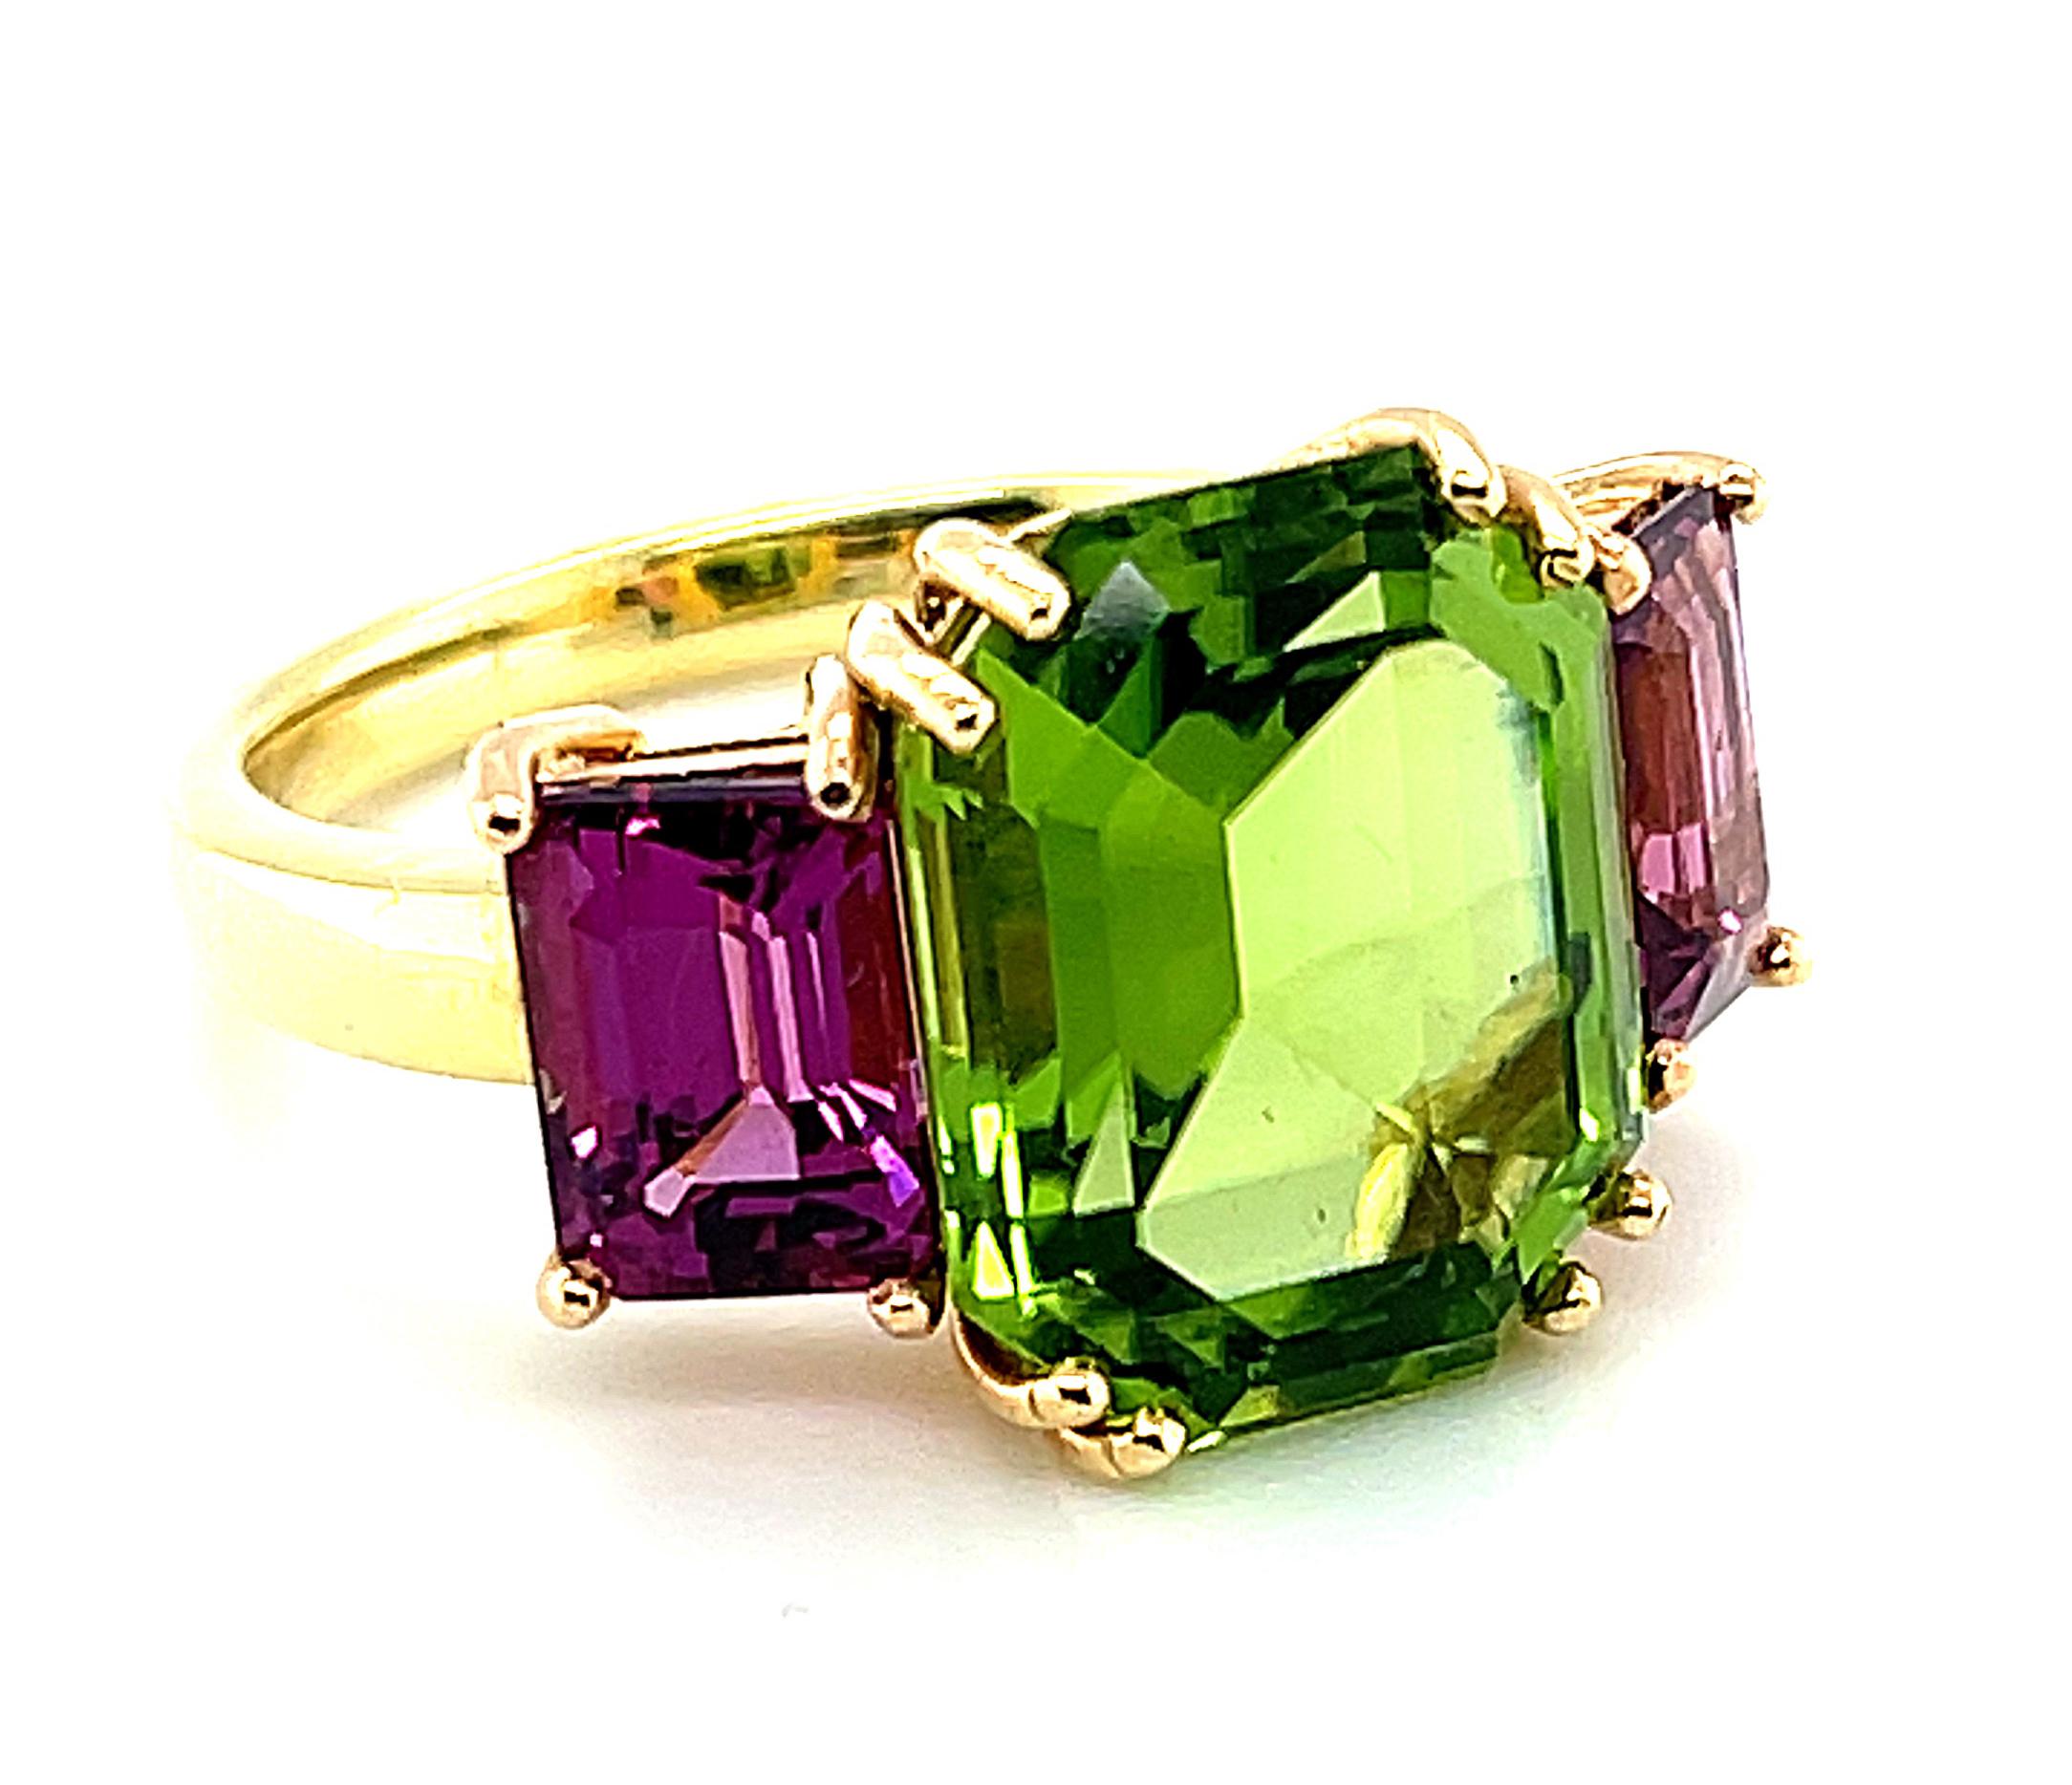 Artisan 6.77 Carat Peridot and Rhodolite Garnet Cocktail Ring in Yellow and Rose Gold   For Sale